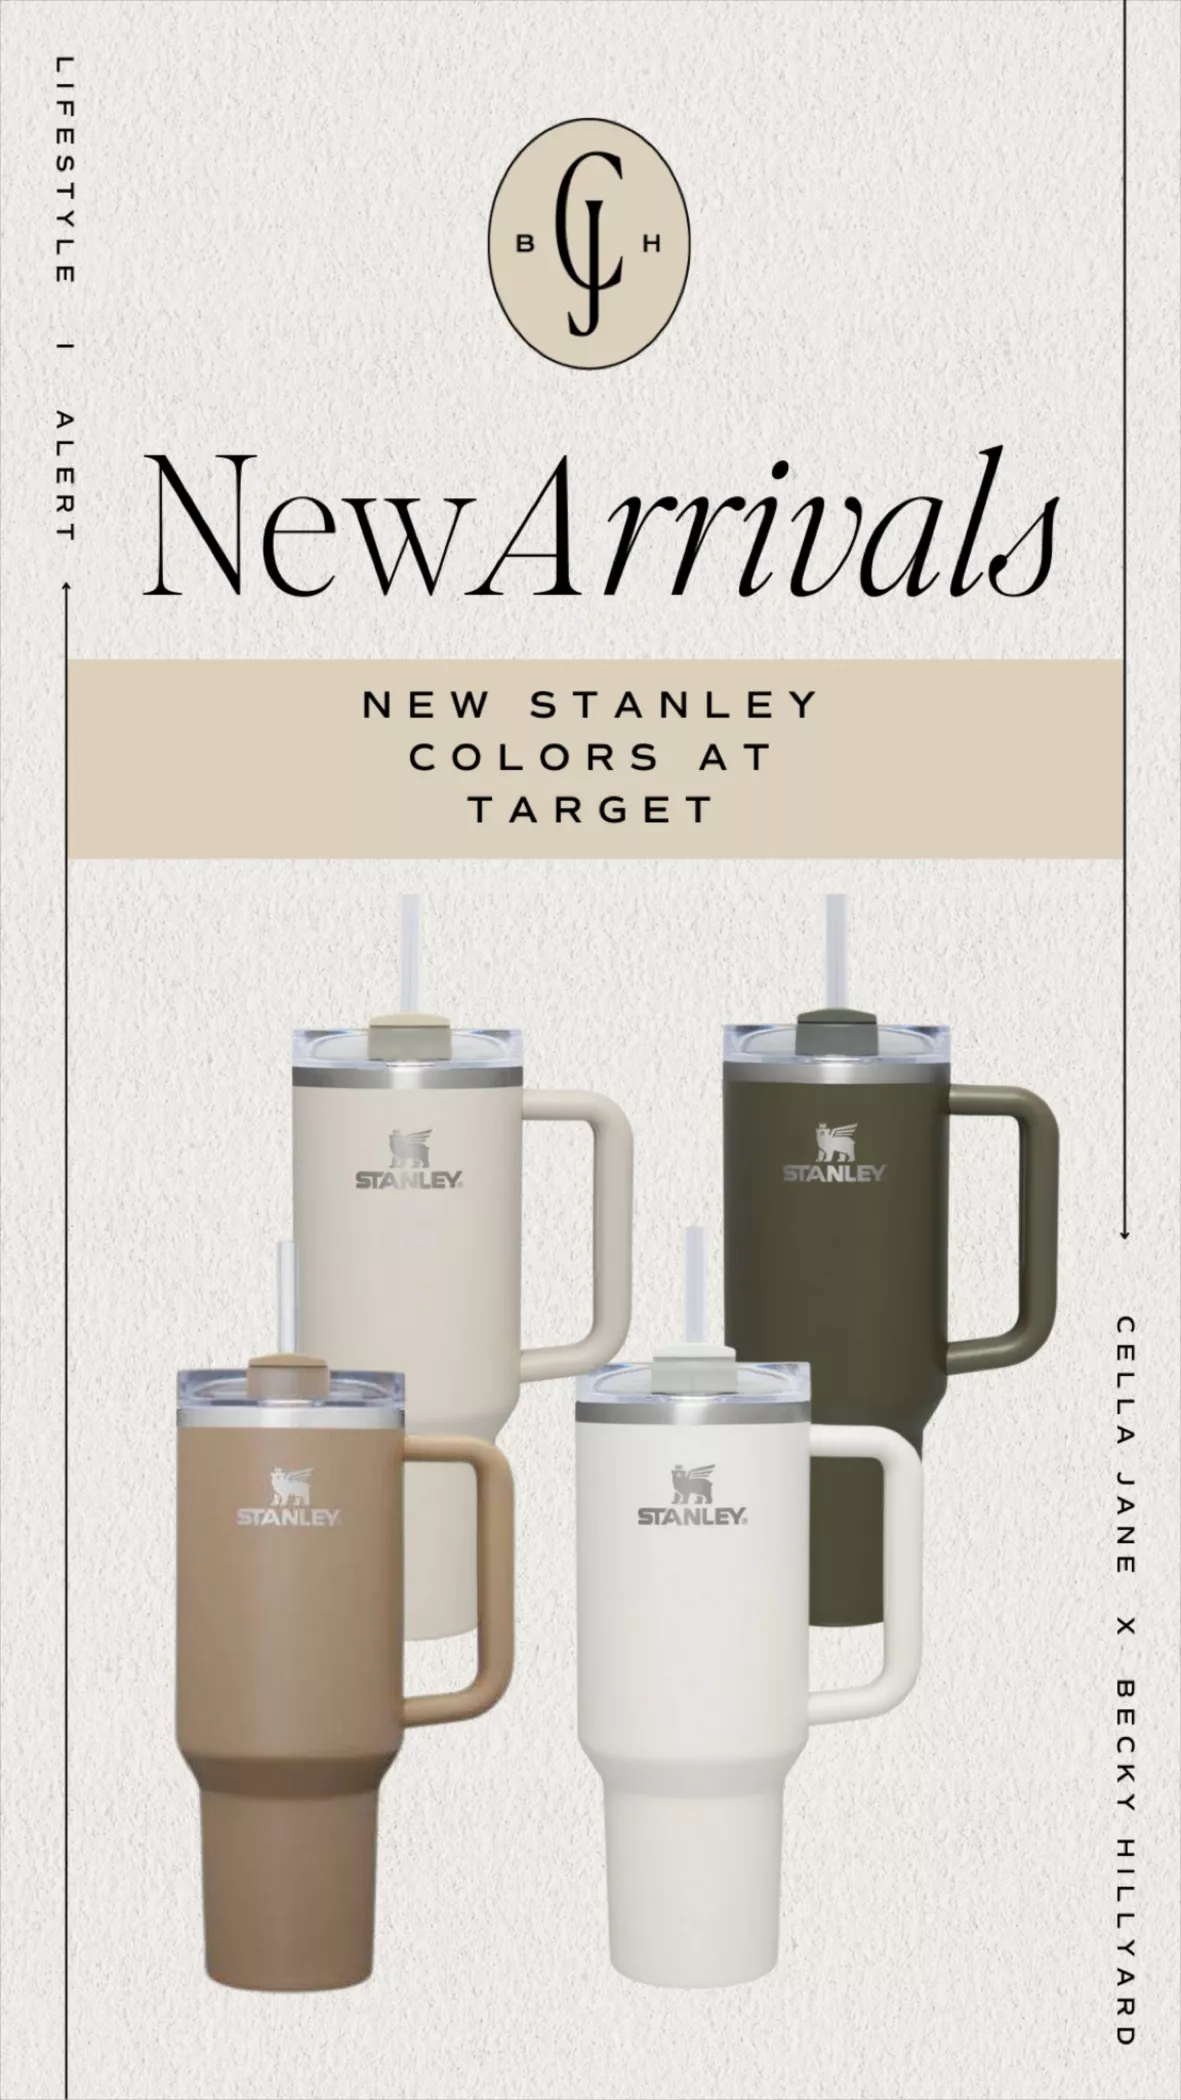 STANLEY x Magnolia 40oz Stainless Steel H2.0